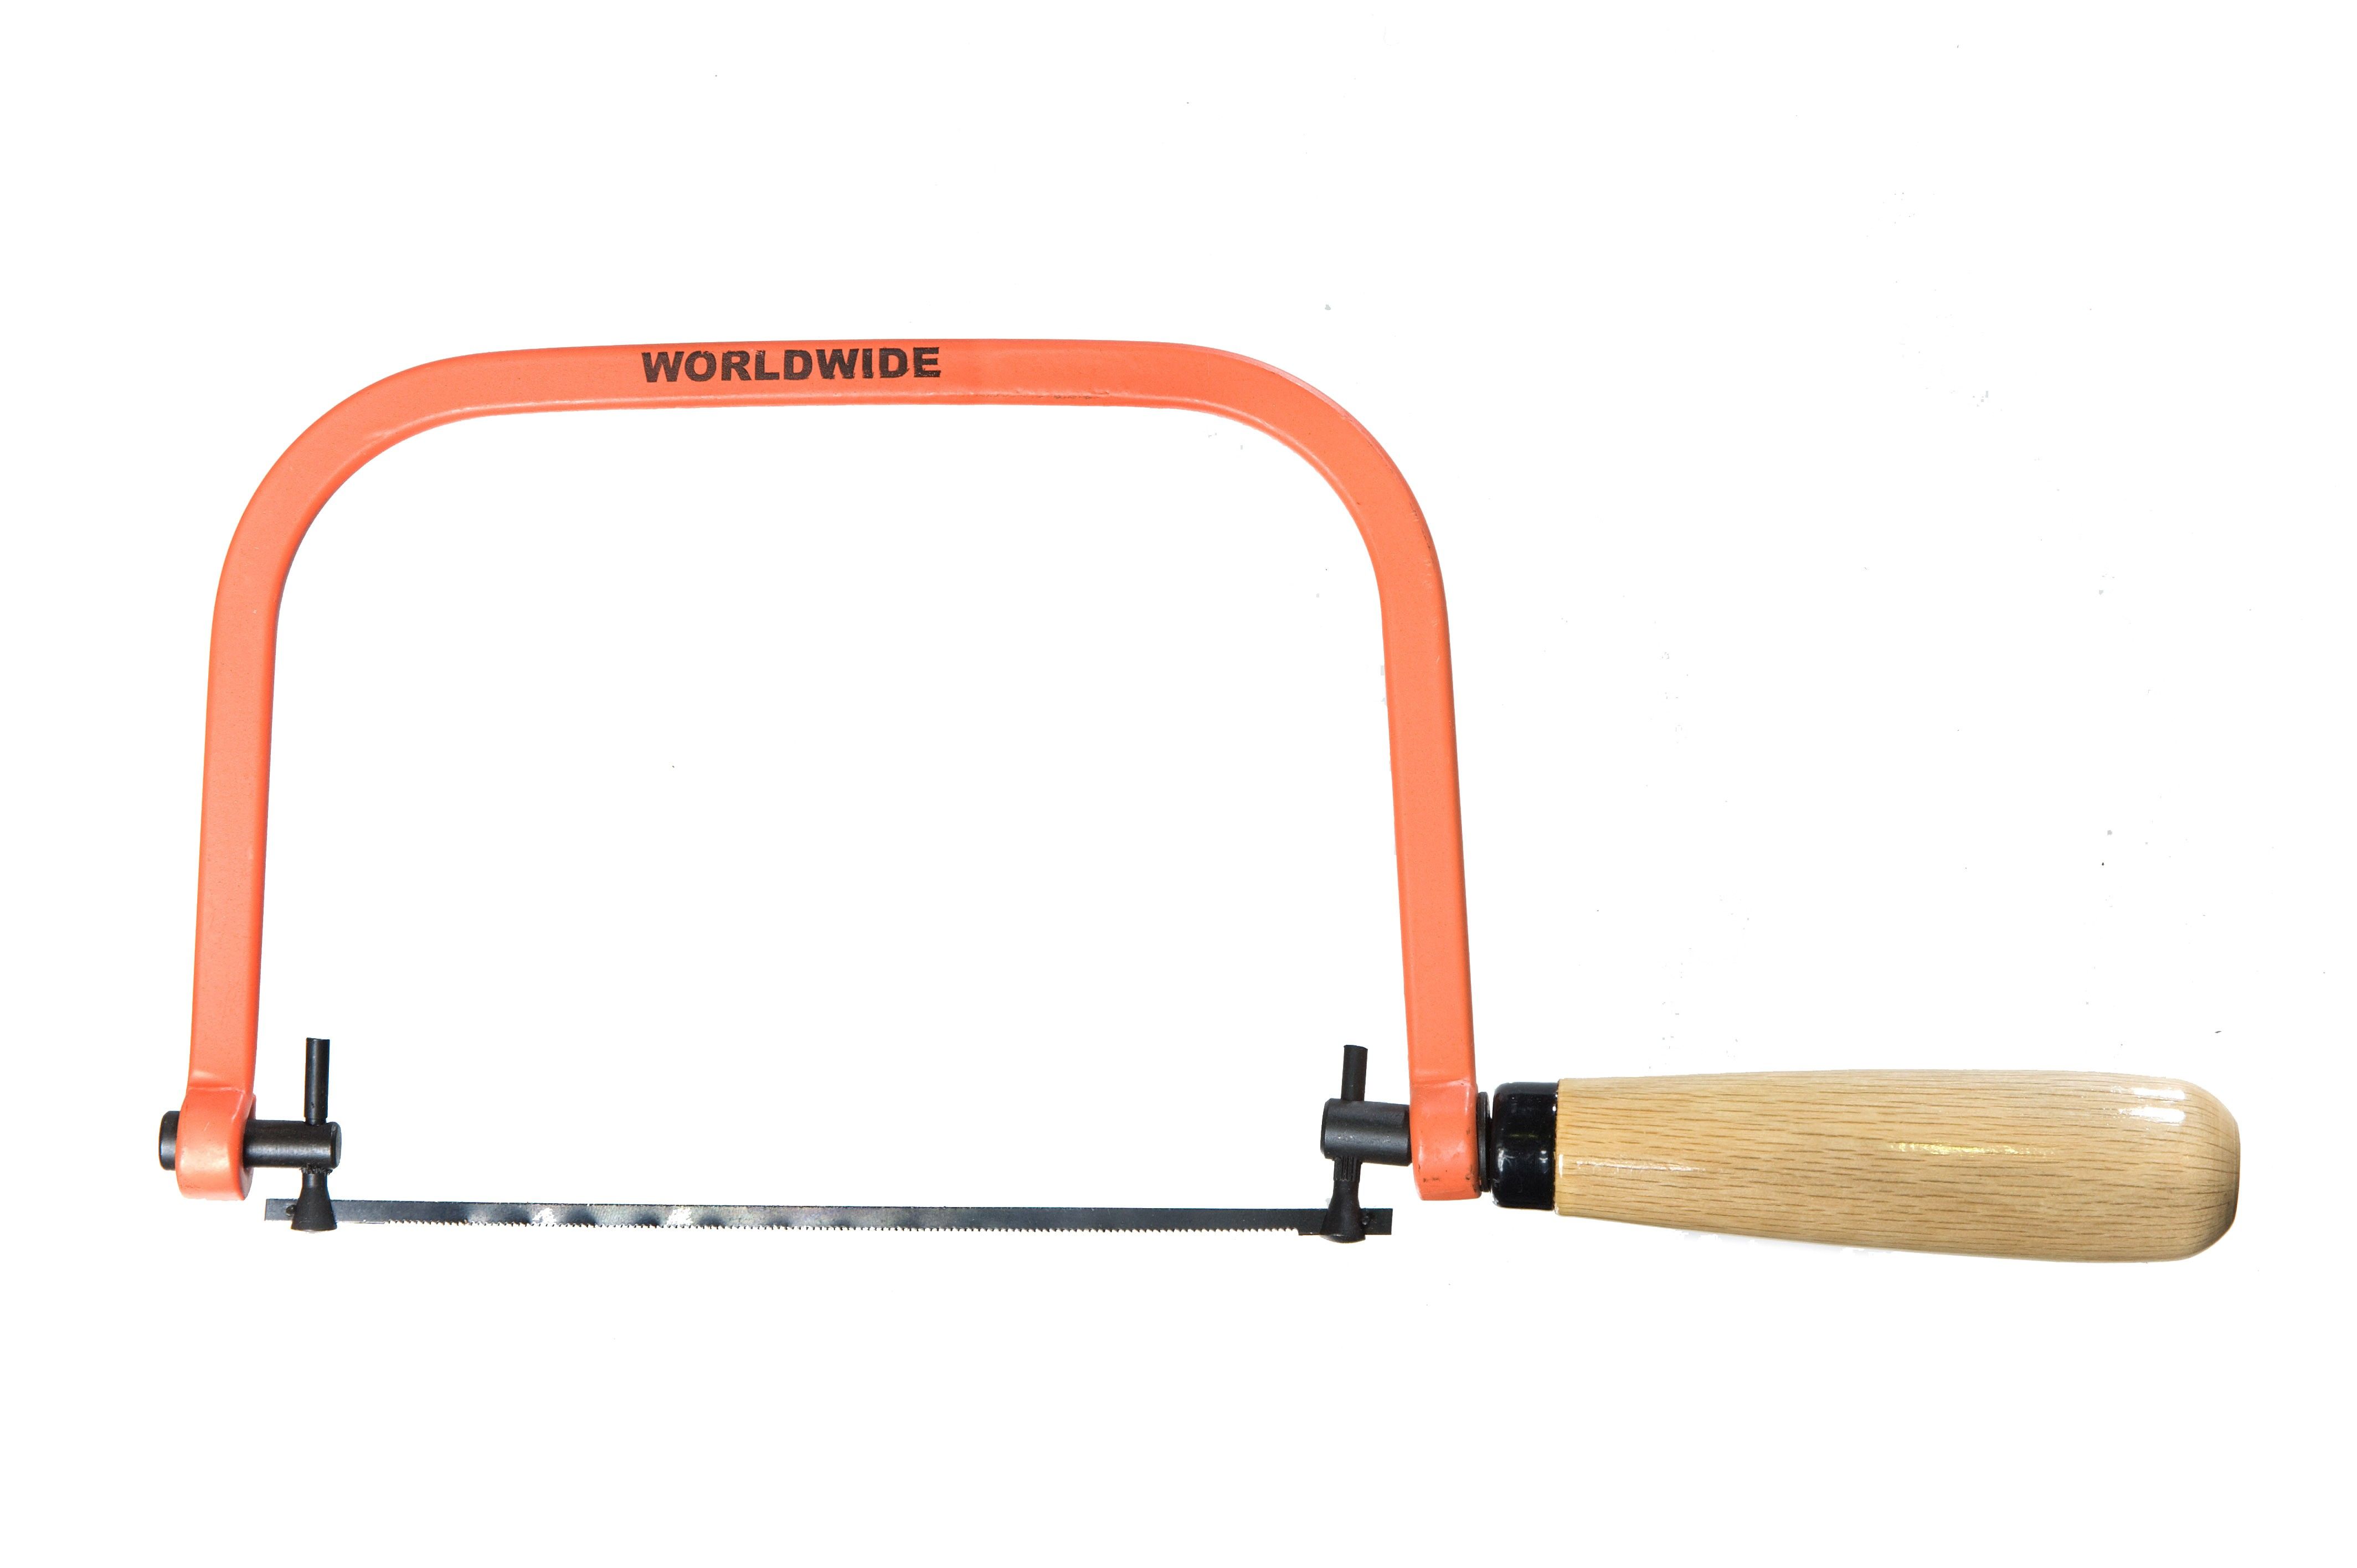 Coping Saw + 5 Blades (170 mm)